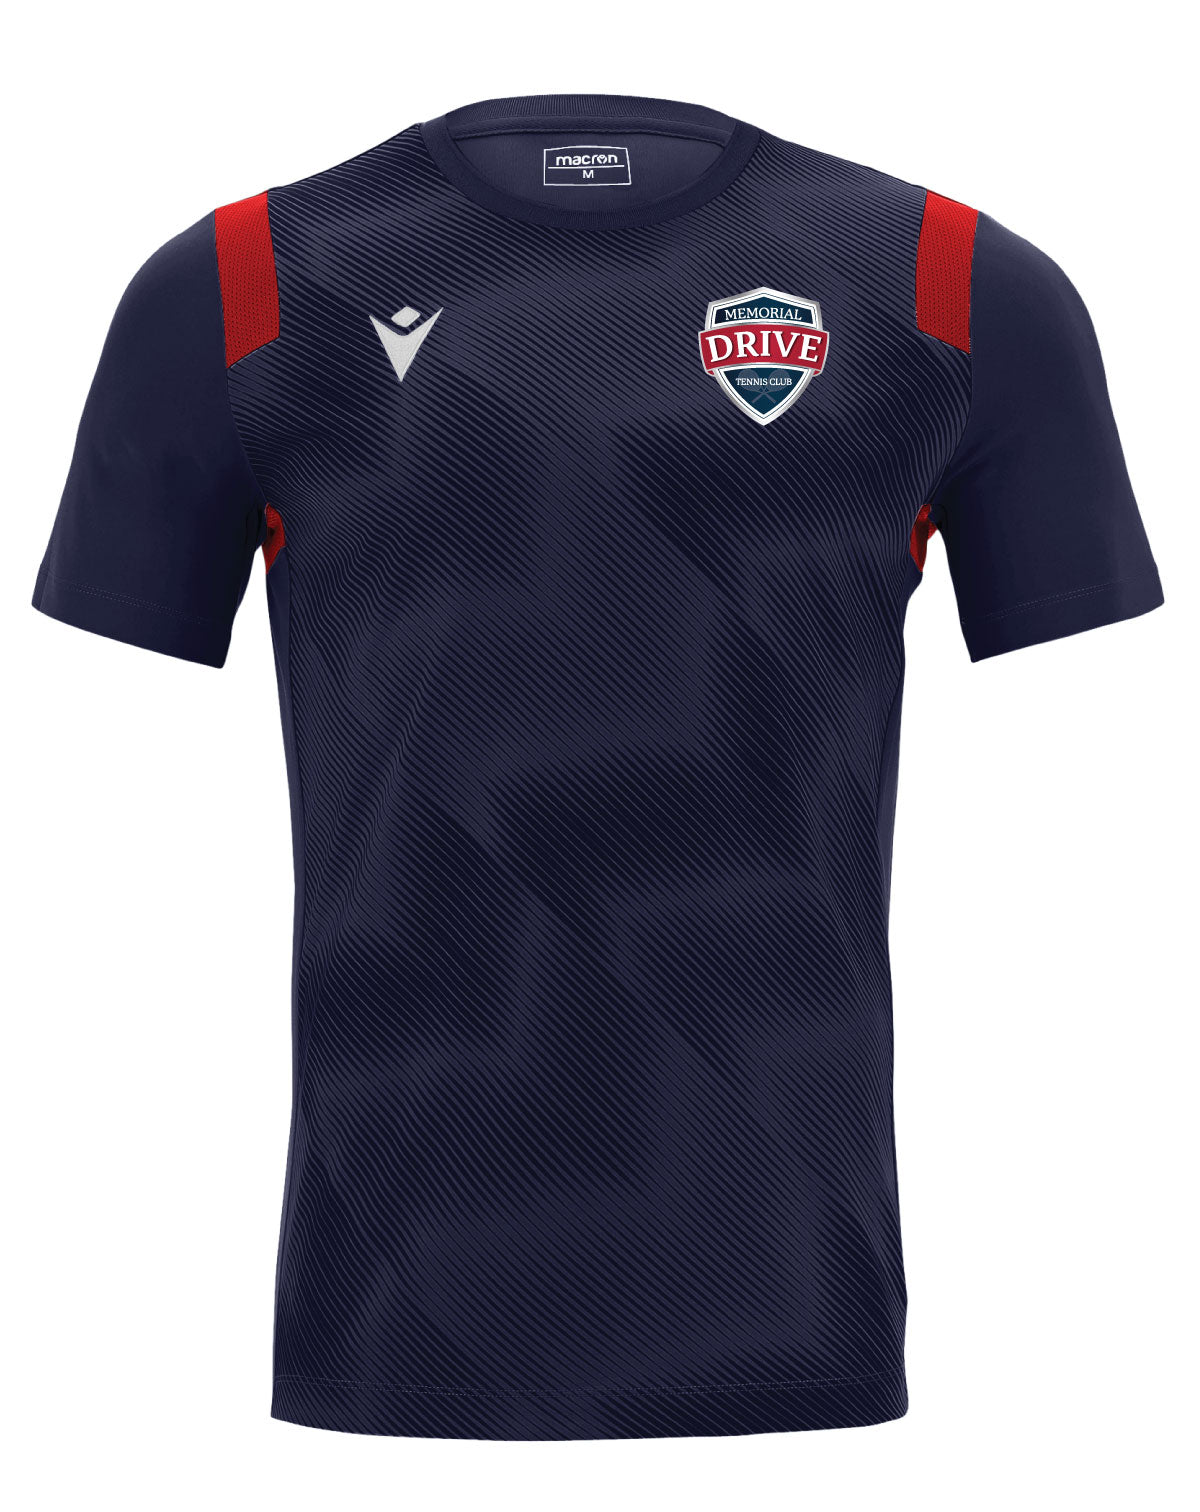 THE DRIVE - RODDERS MATCH SHIRT (NAVY/RED)